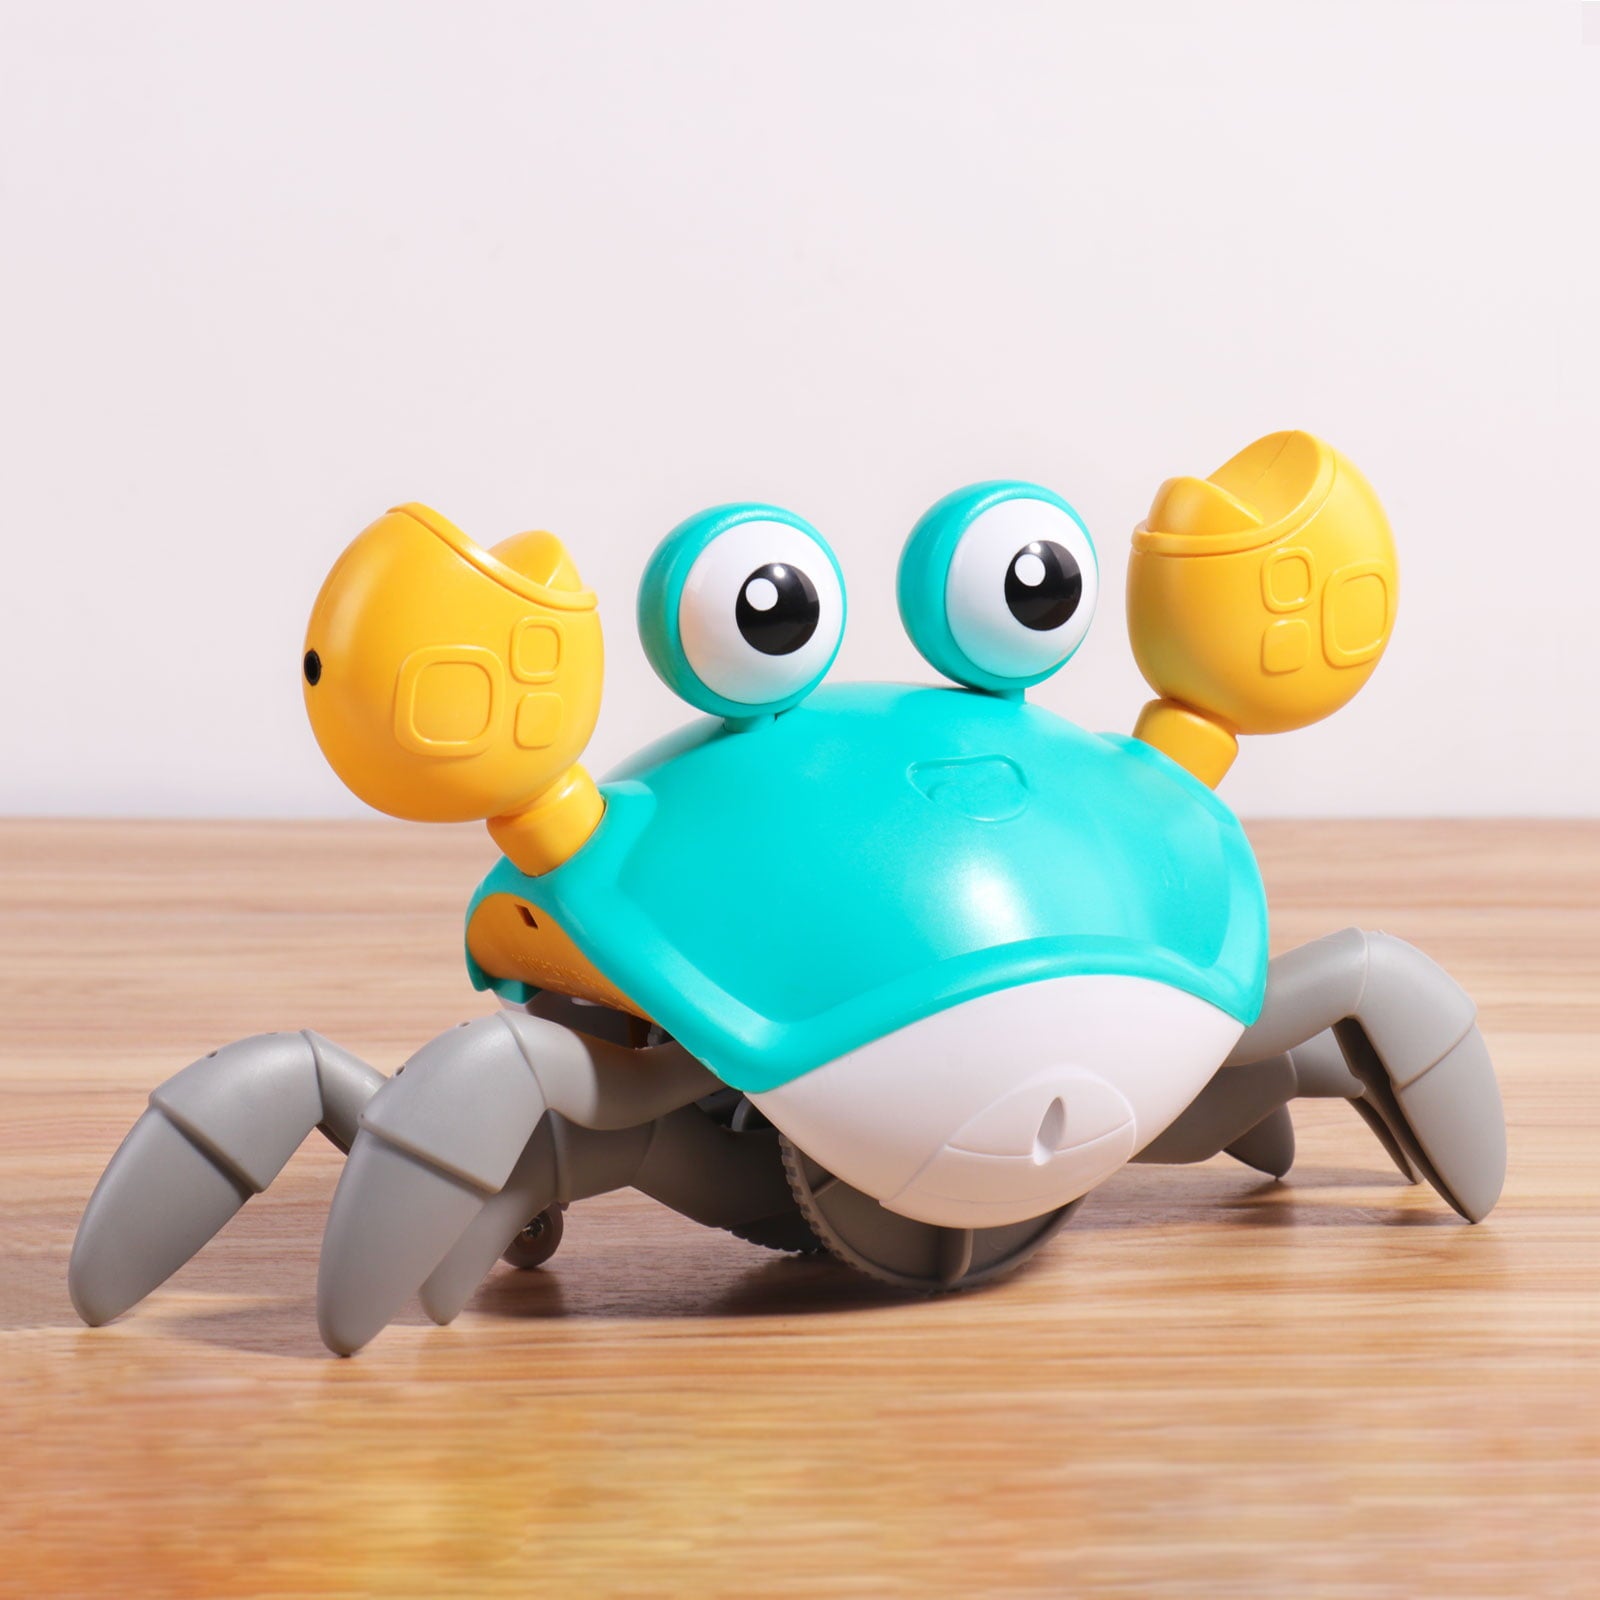 Hugo Sensory Crawling Crab For Little Kids 6-12 Years And Toddlers 0-6 Months Tummy Time and Encourage Learning Crawl - Ideal Birthday And Christmas Gift